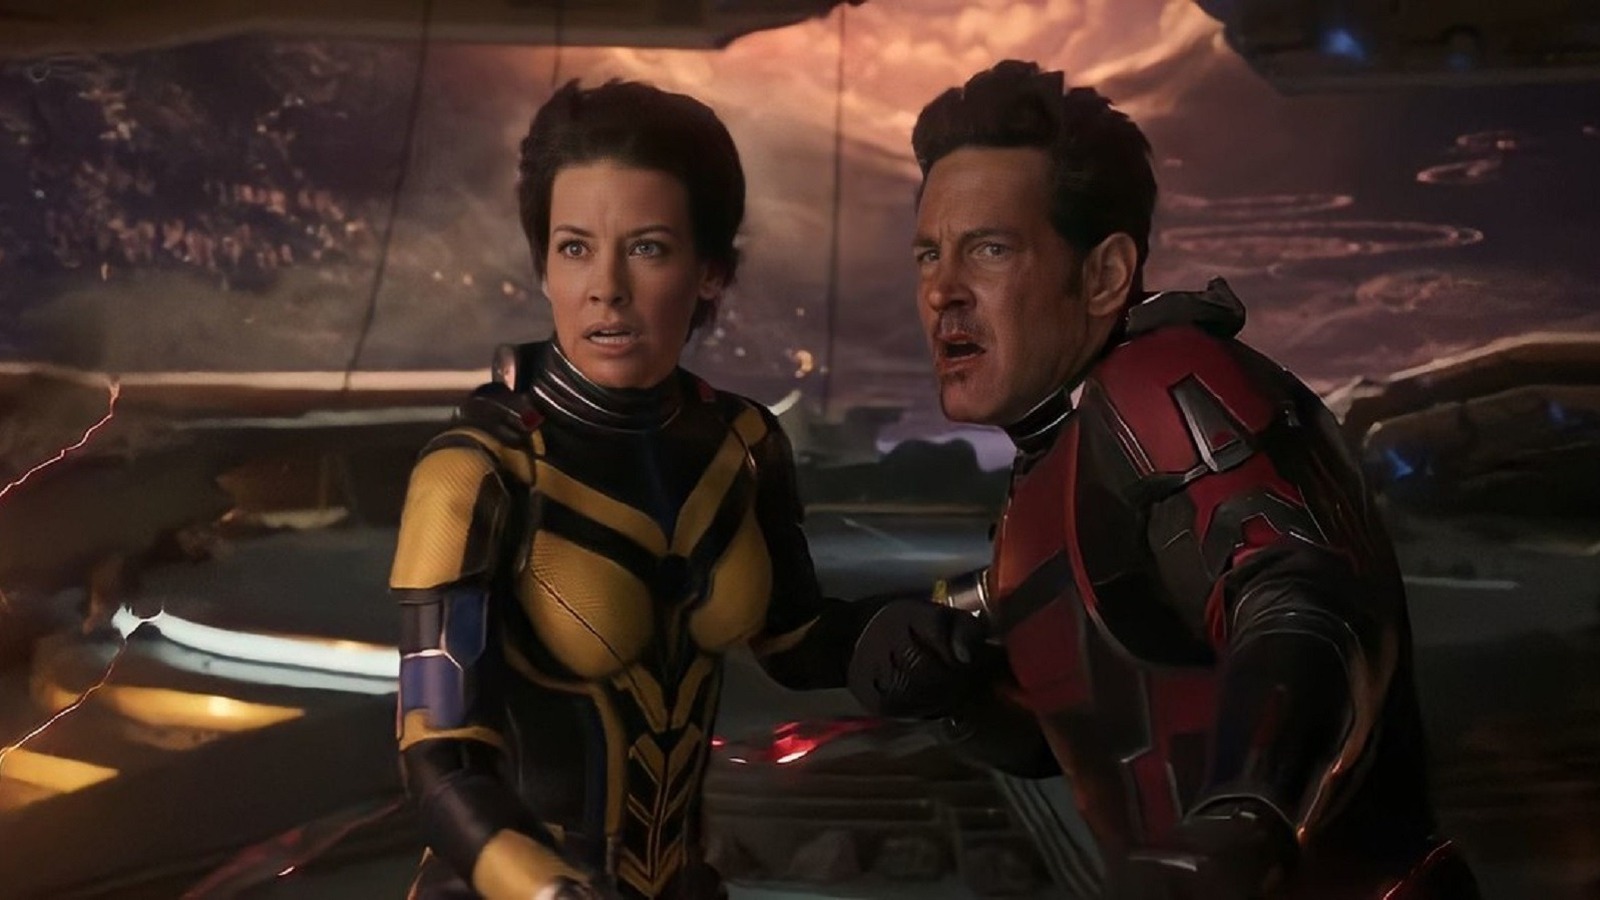 Marvel Studios' Ant-man and the Wasp: Quantumania is a child-friendly